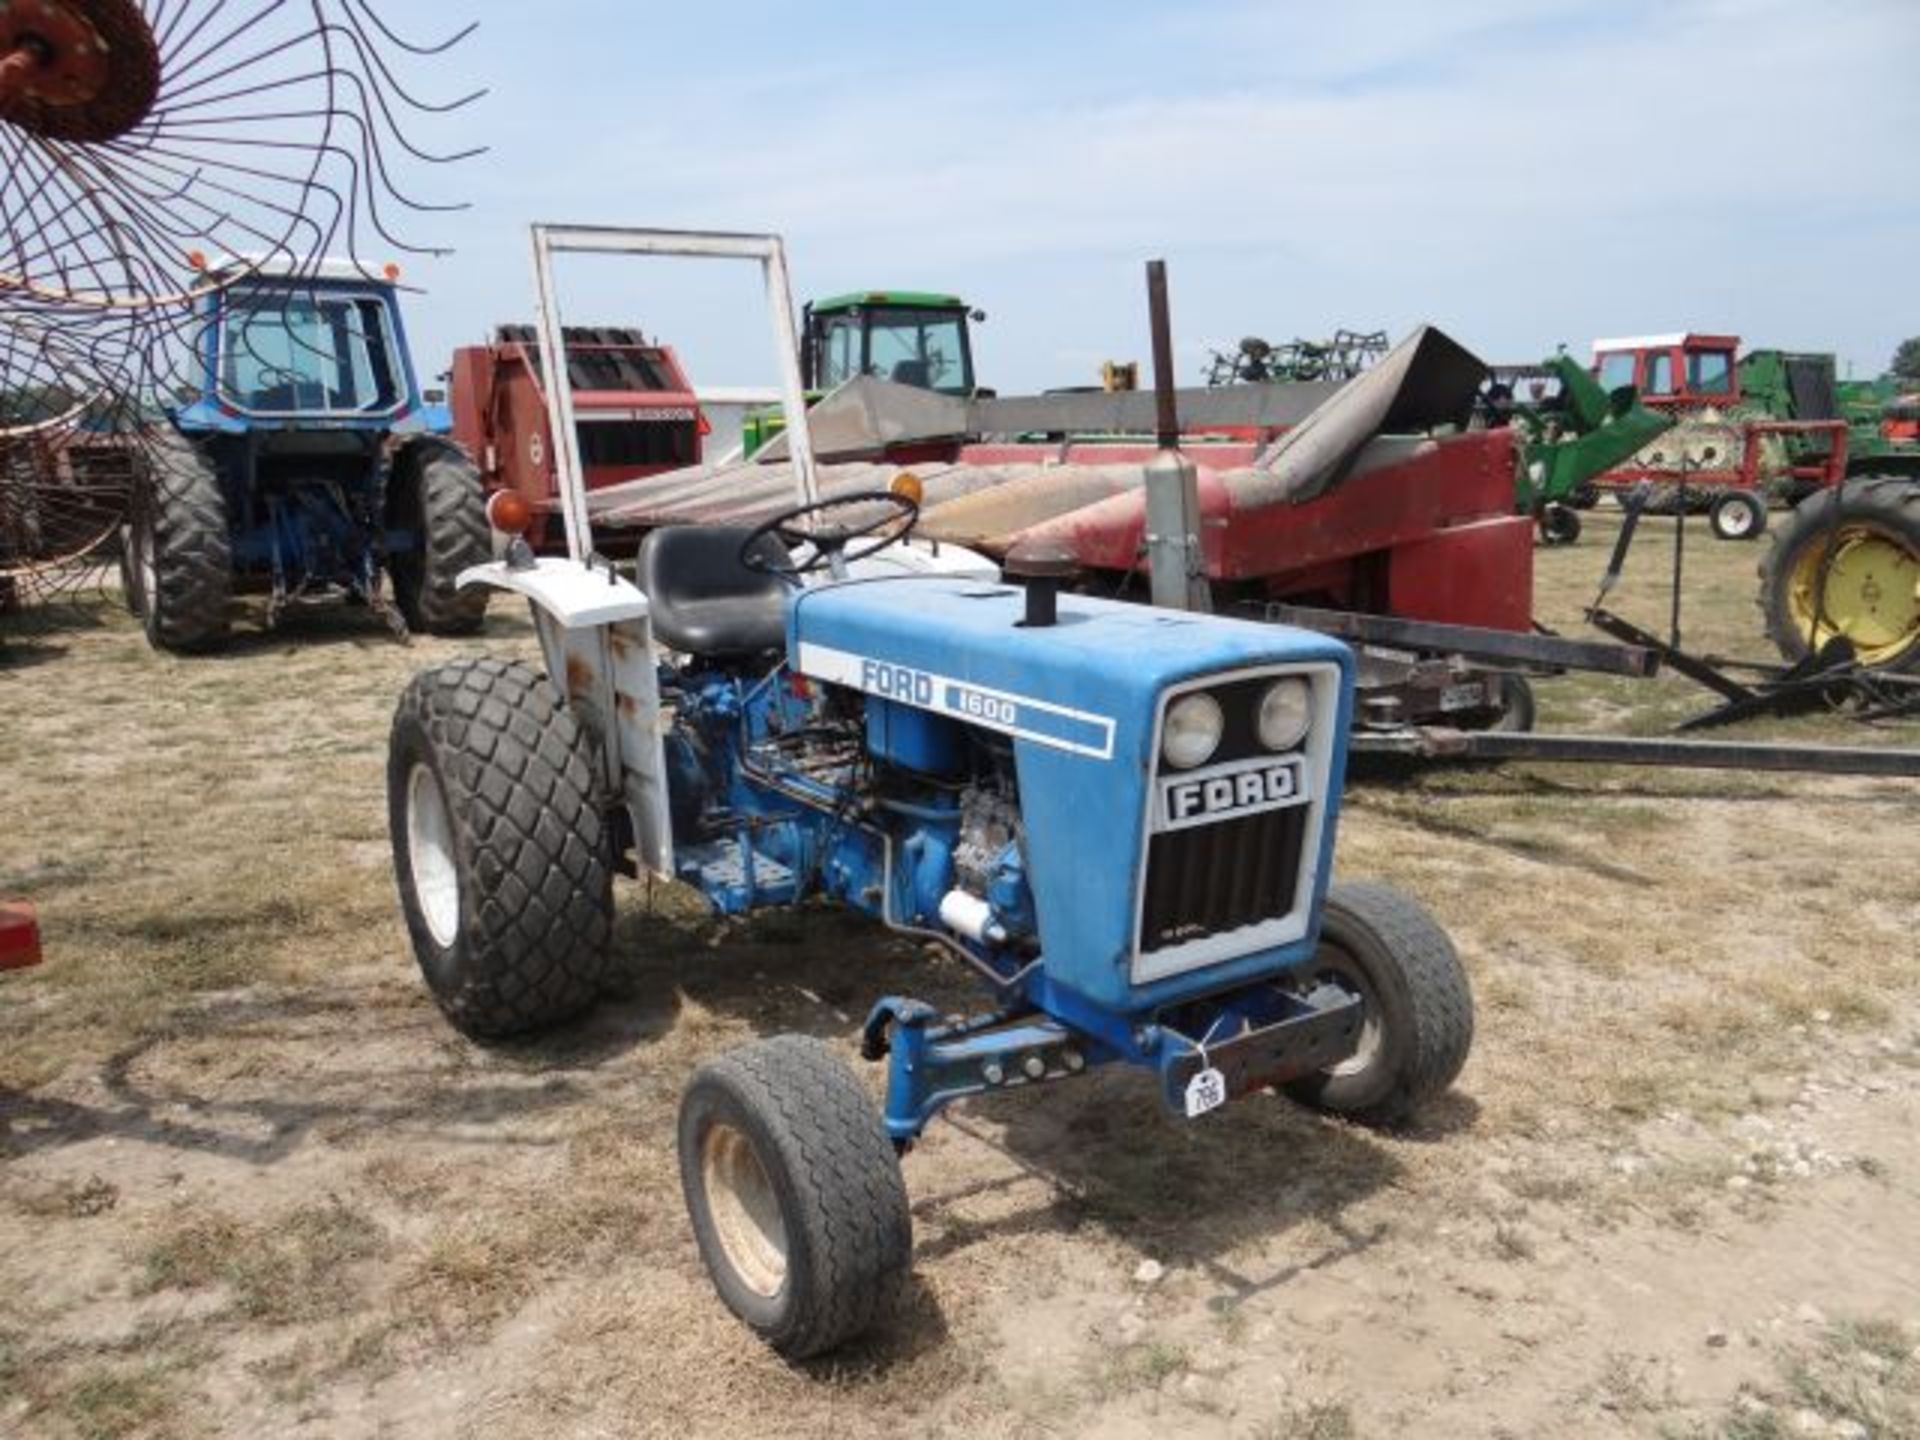 Ford 1600 Tractor, 1977 #112857, 4057 hrs, 2wd, 23hp Diesel, 9F/3R Trans, Diff Lock, 540 PTO